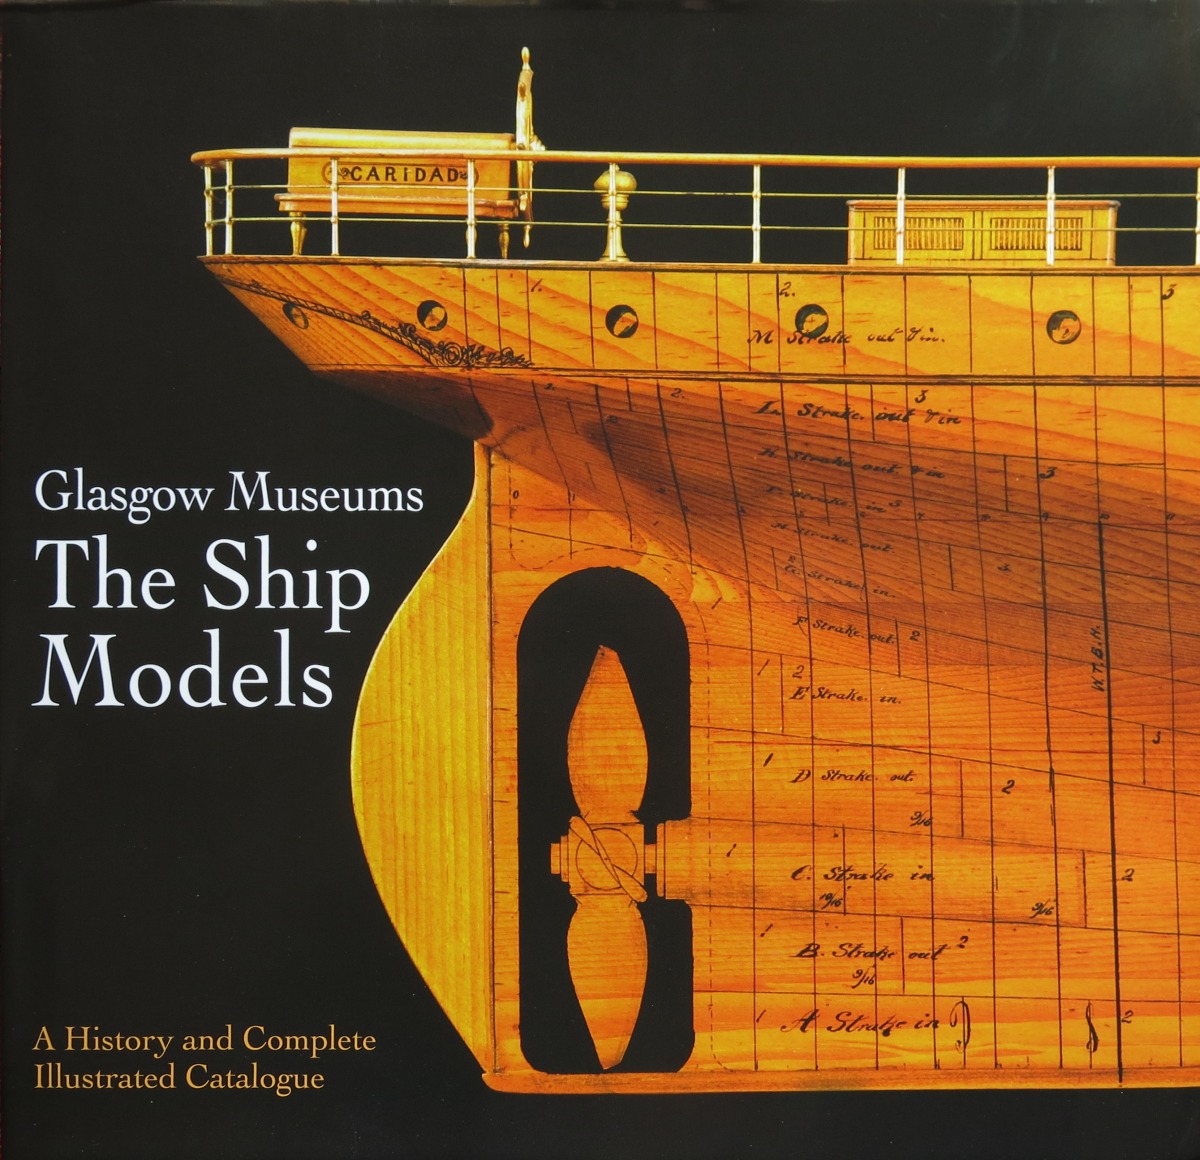 [The Ship Models Catalogue front cover - click for a larger view]